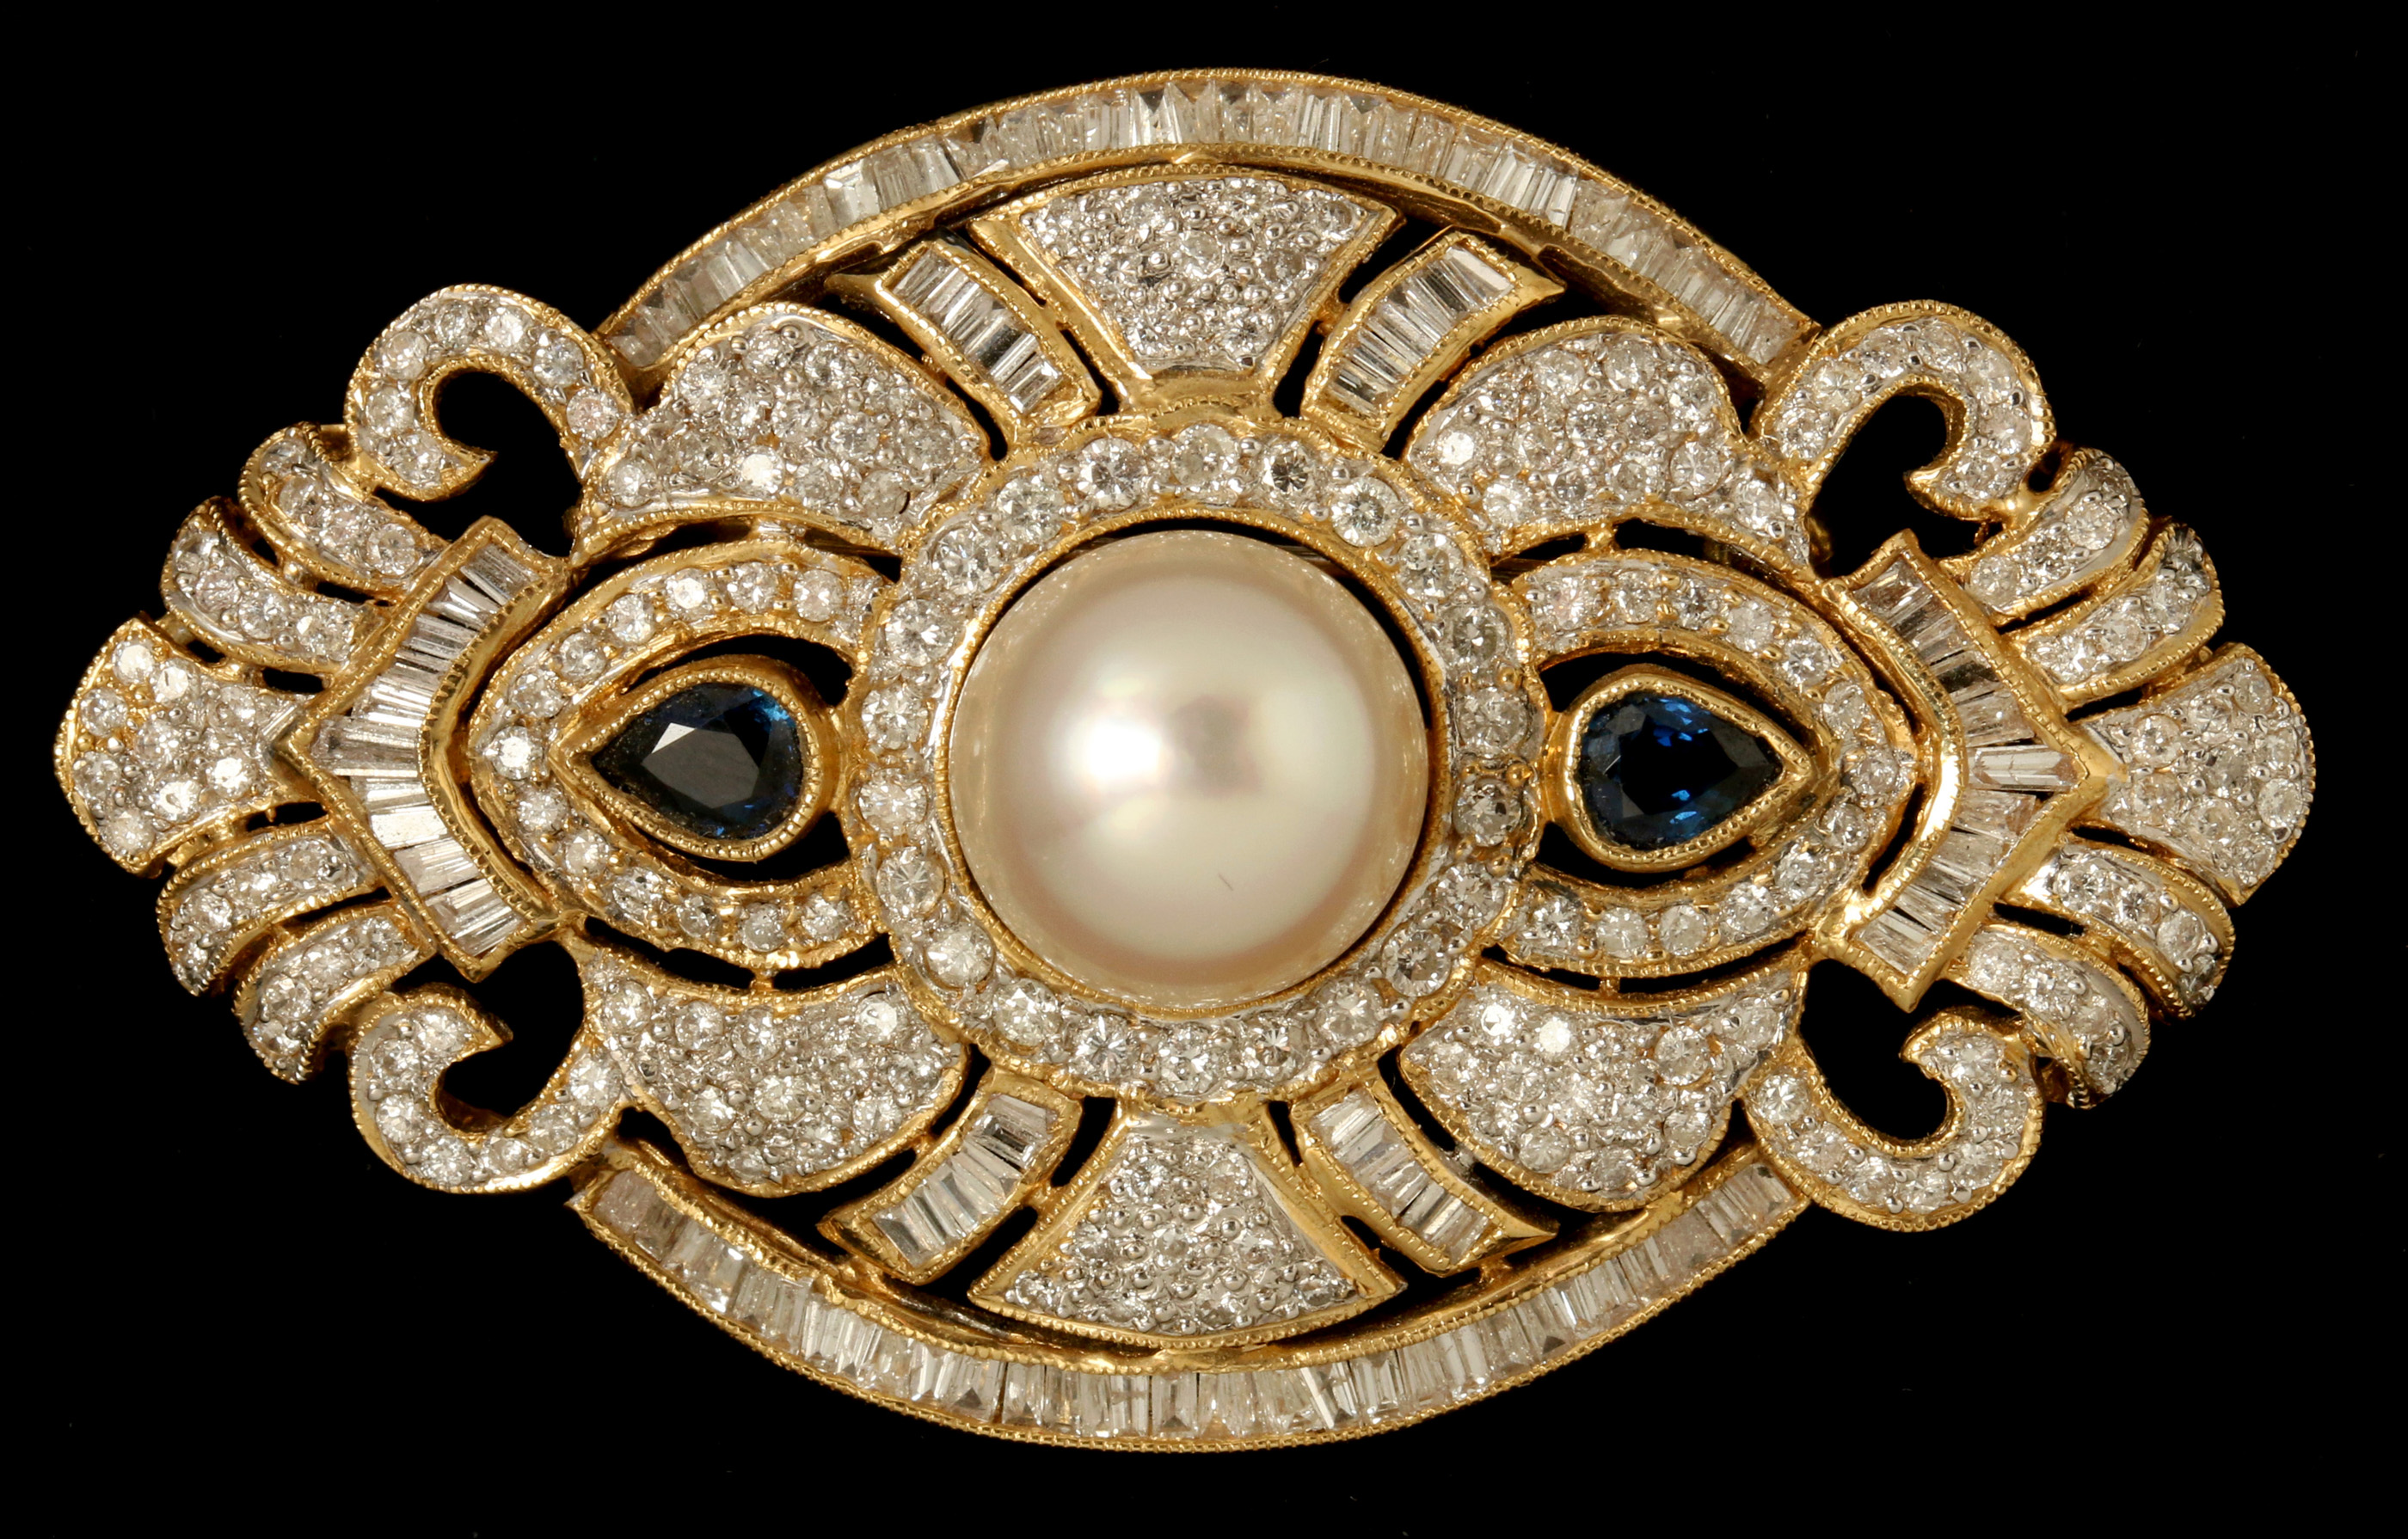 A VERY FINE GOLD DIAMOND, SAPPHIRE AND PEARL BROOC